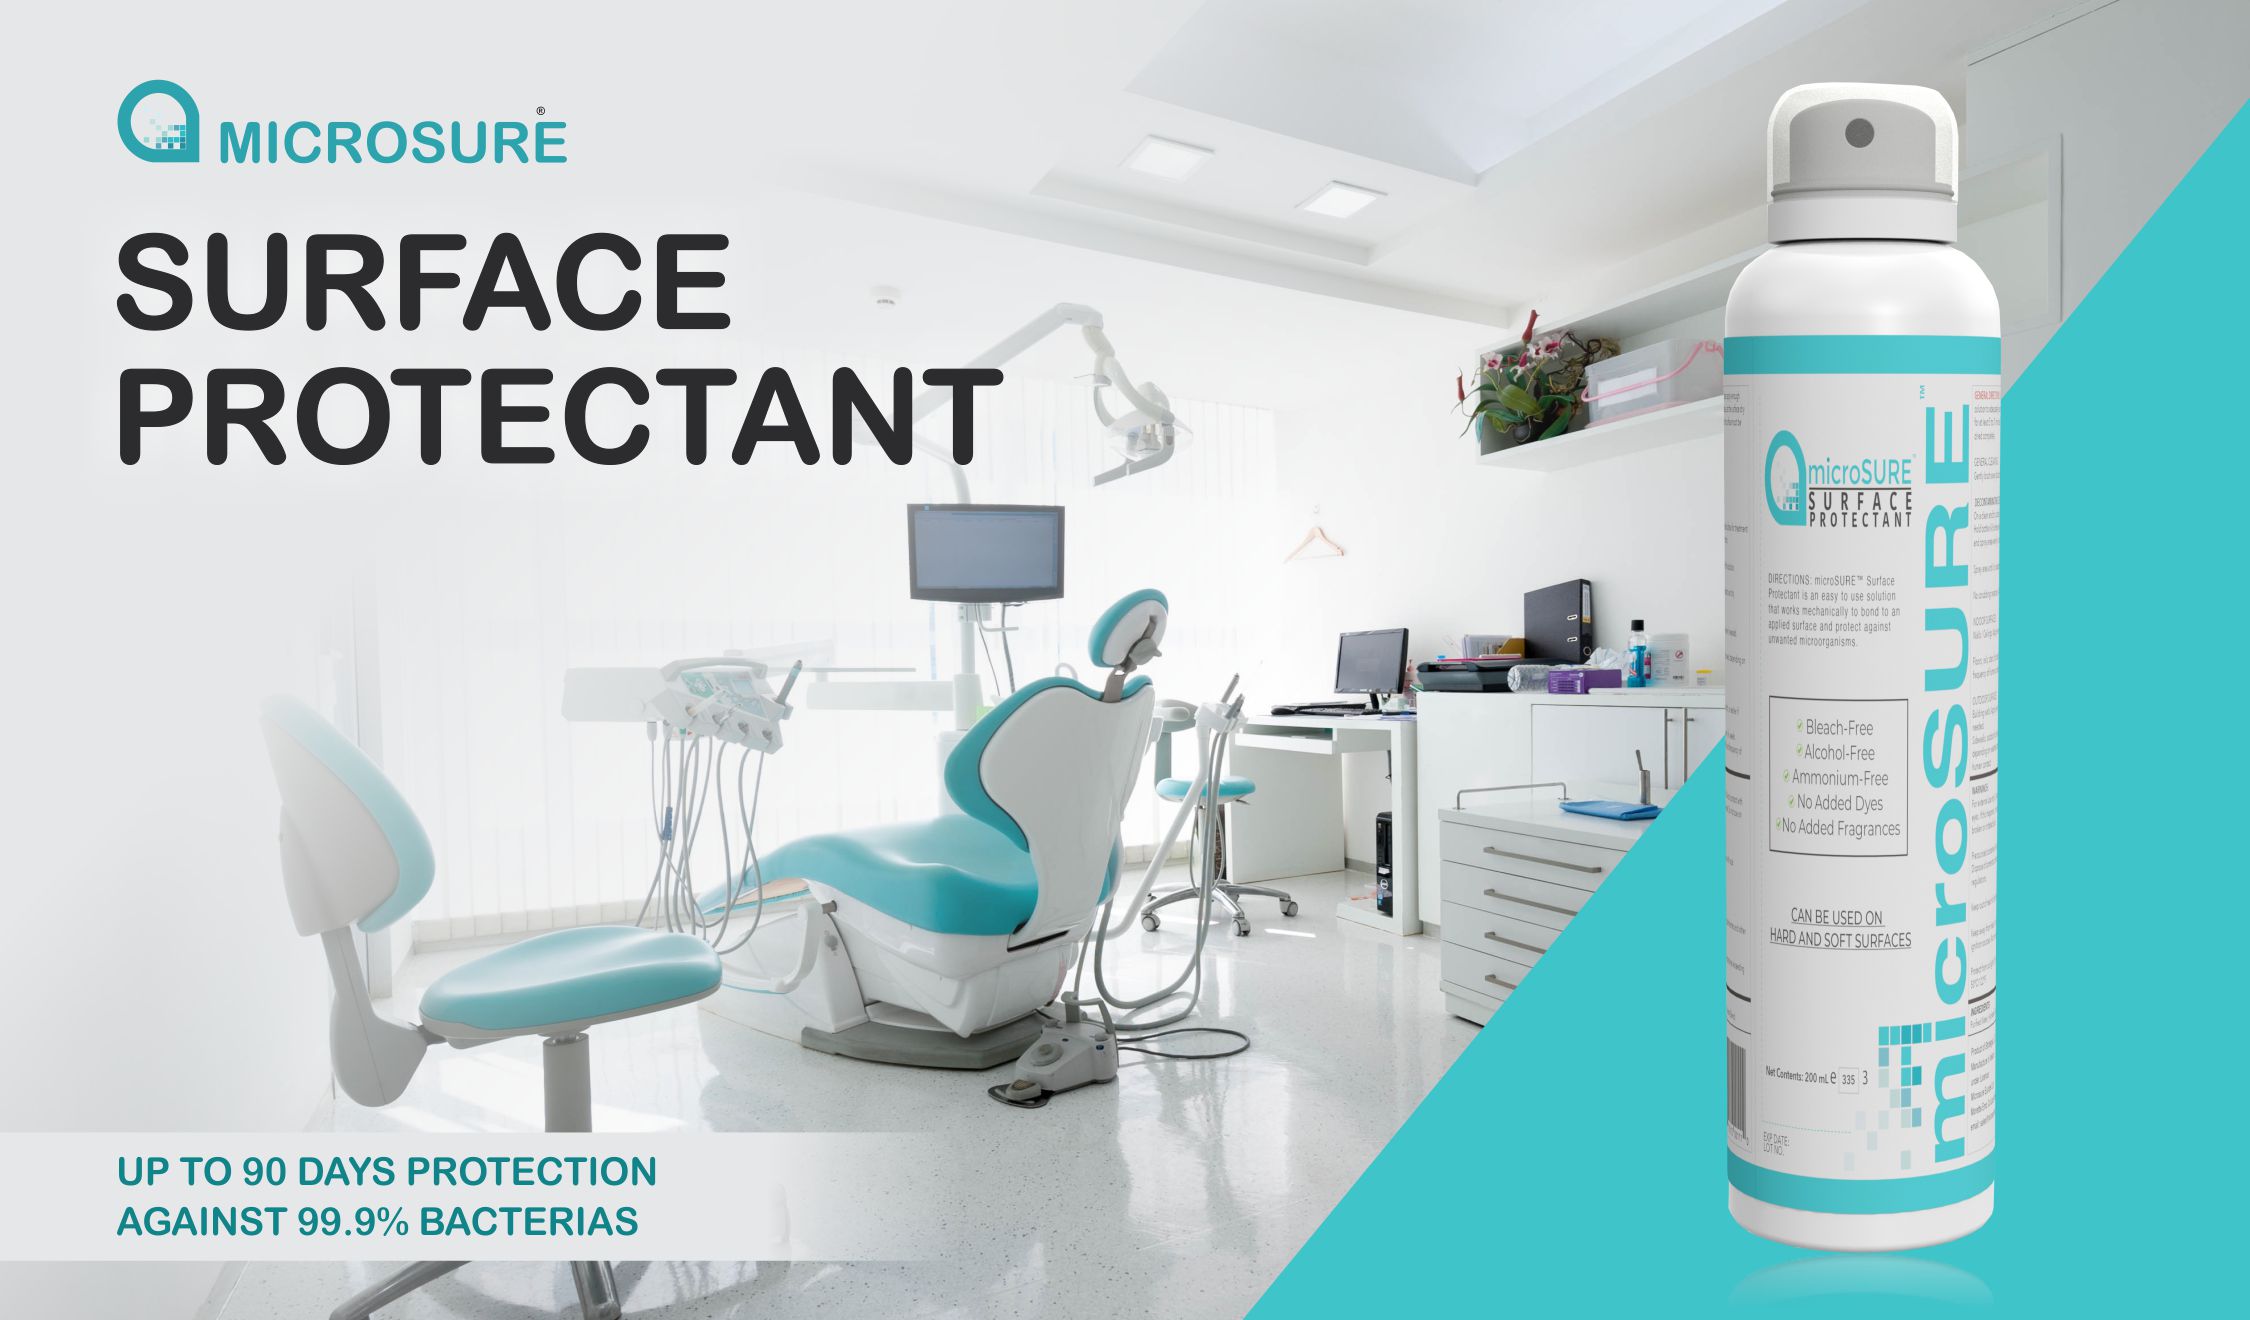 Microsure Surface Protectant